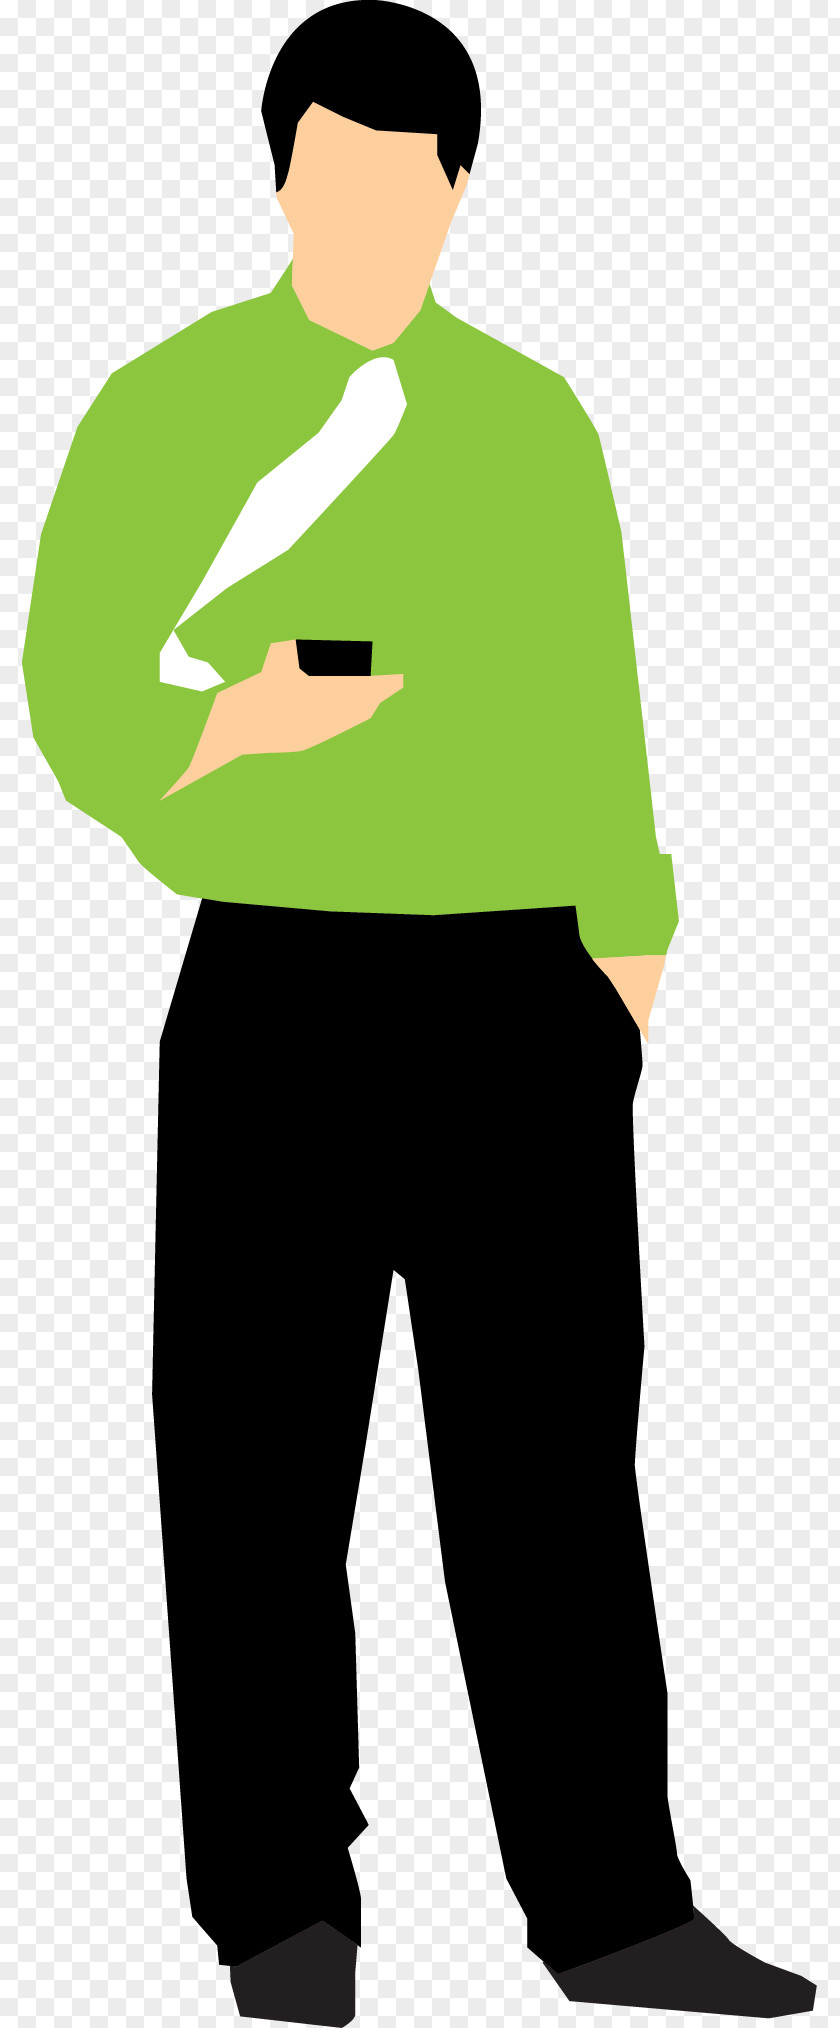 The Man With Cell Phone Mobile Telephone PNG